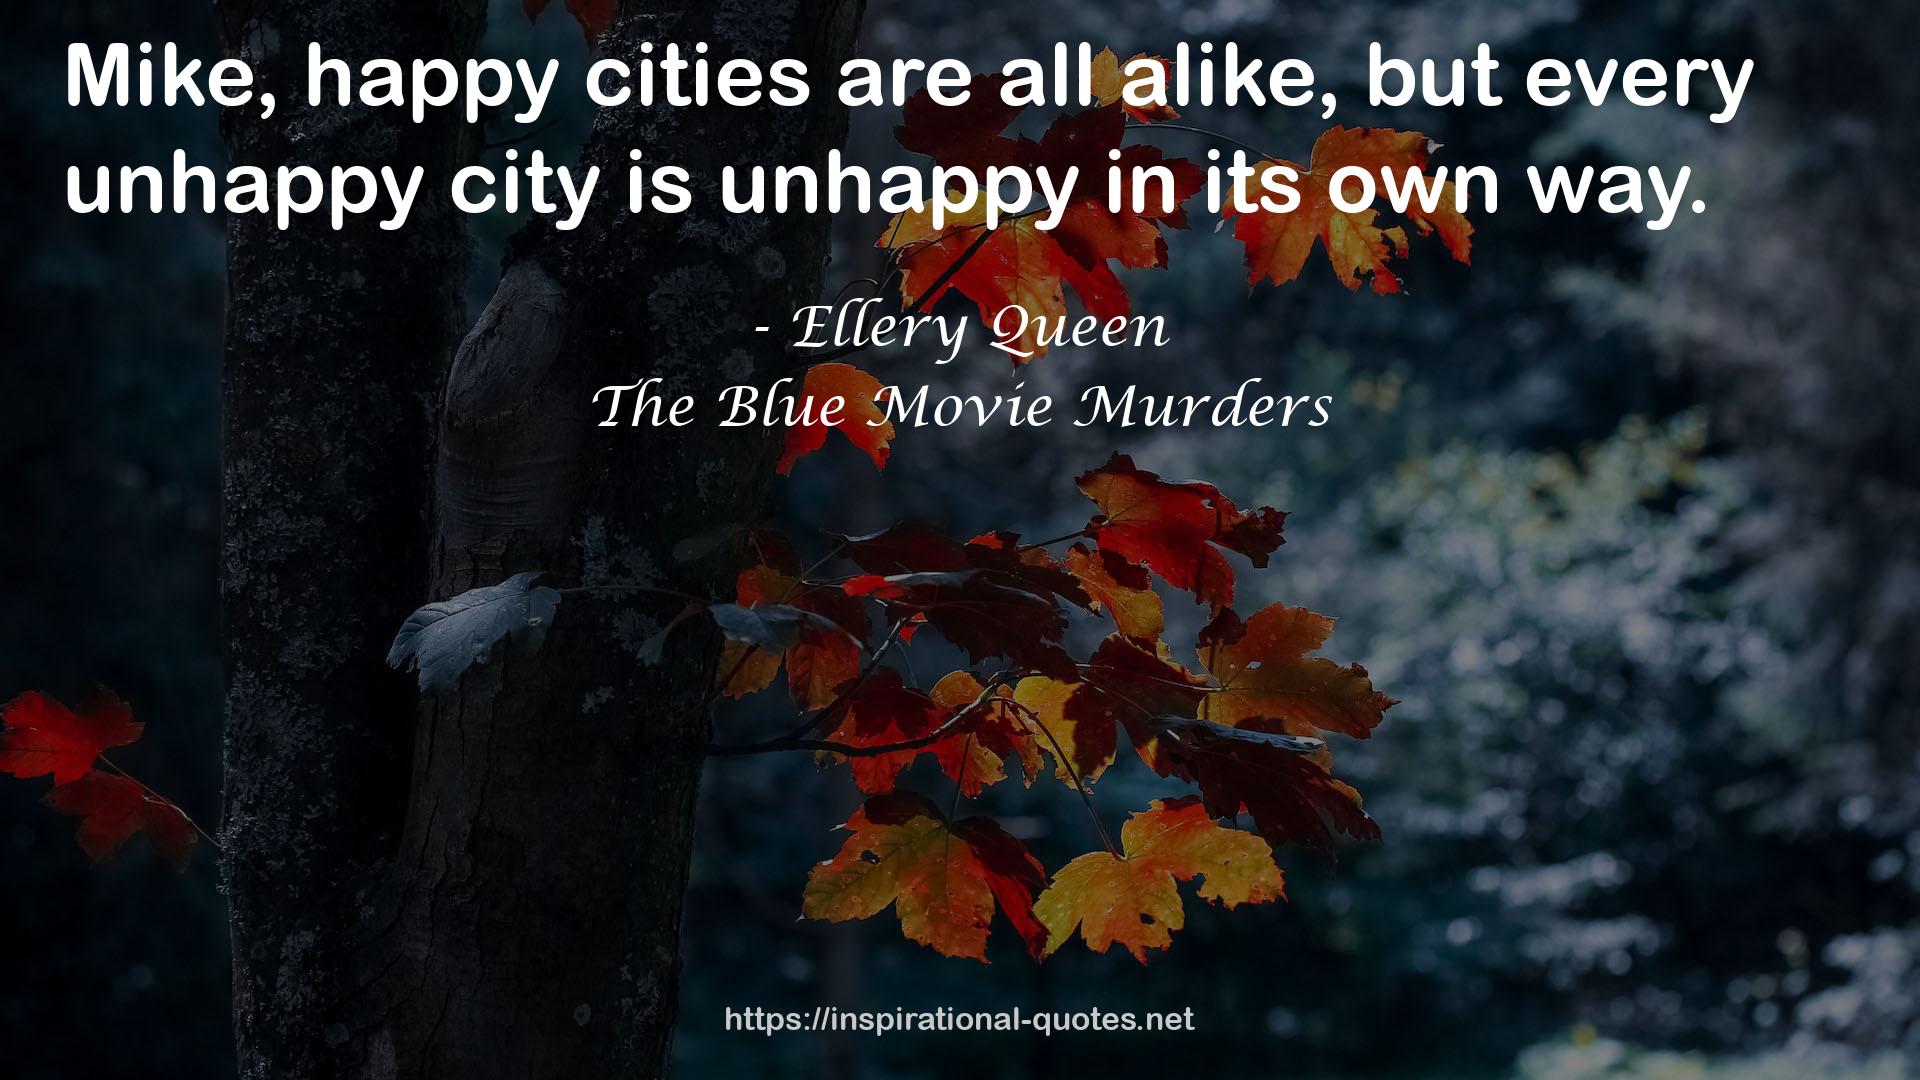 The Blue Movie Murders QUOTES